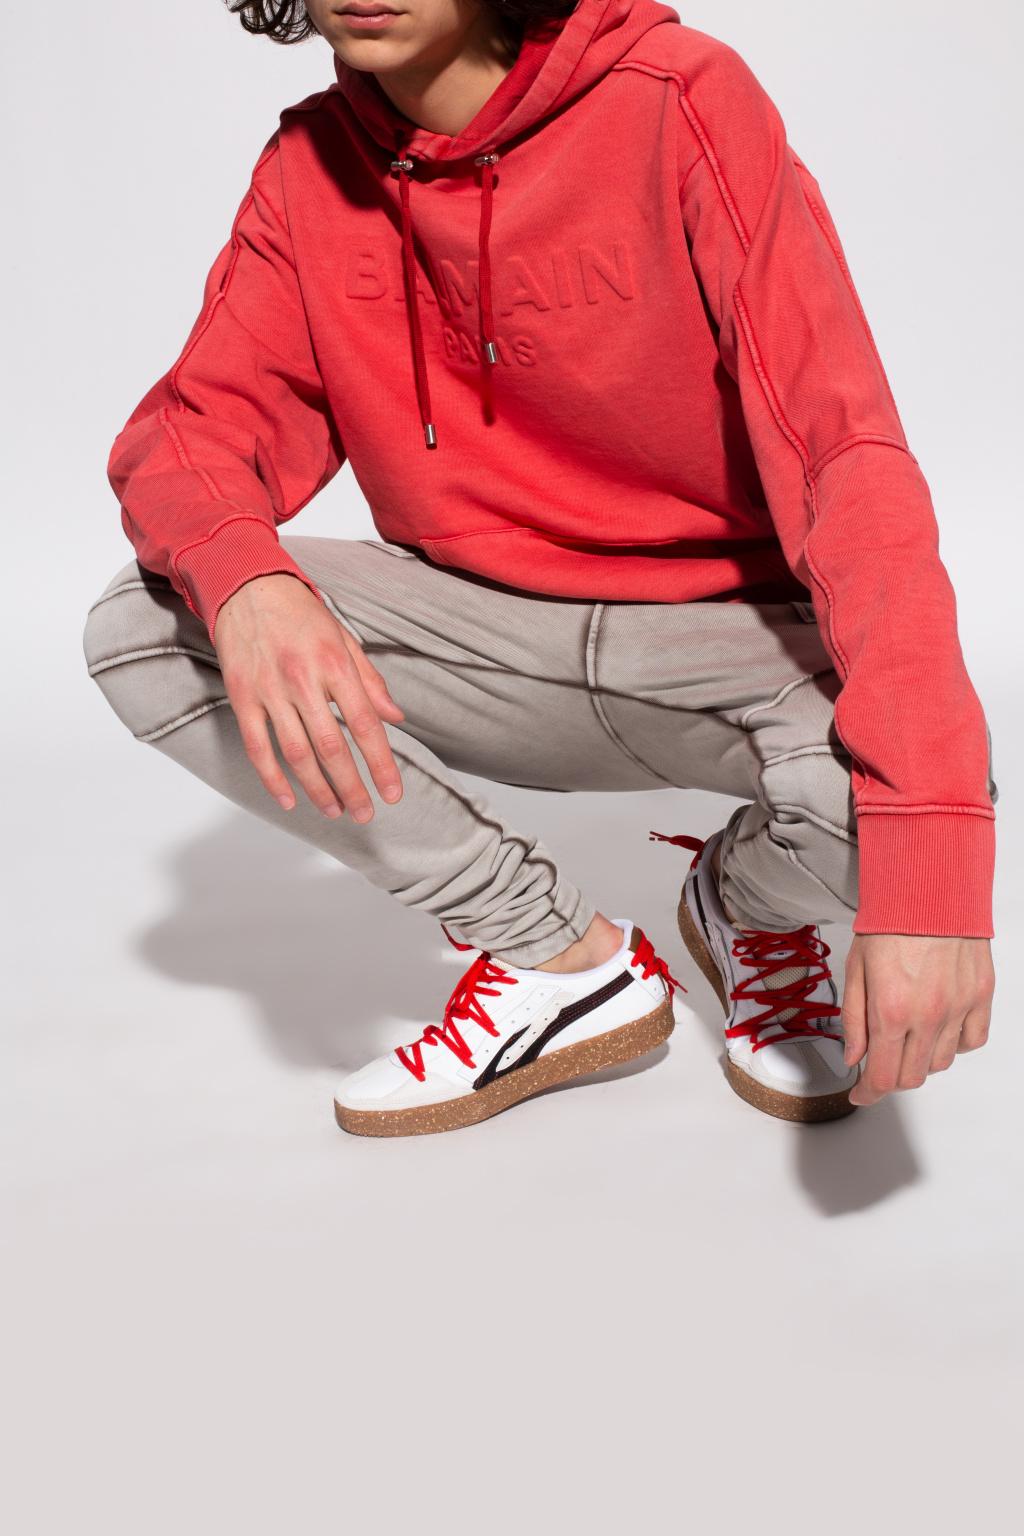 PUMA Synthetic 'oslo-city Re.gen' Sneakers in Red for Men - Lyst